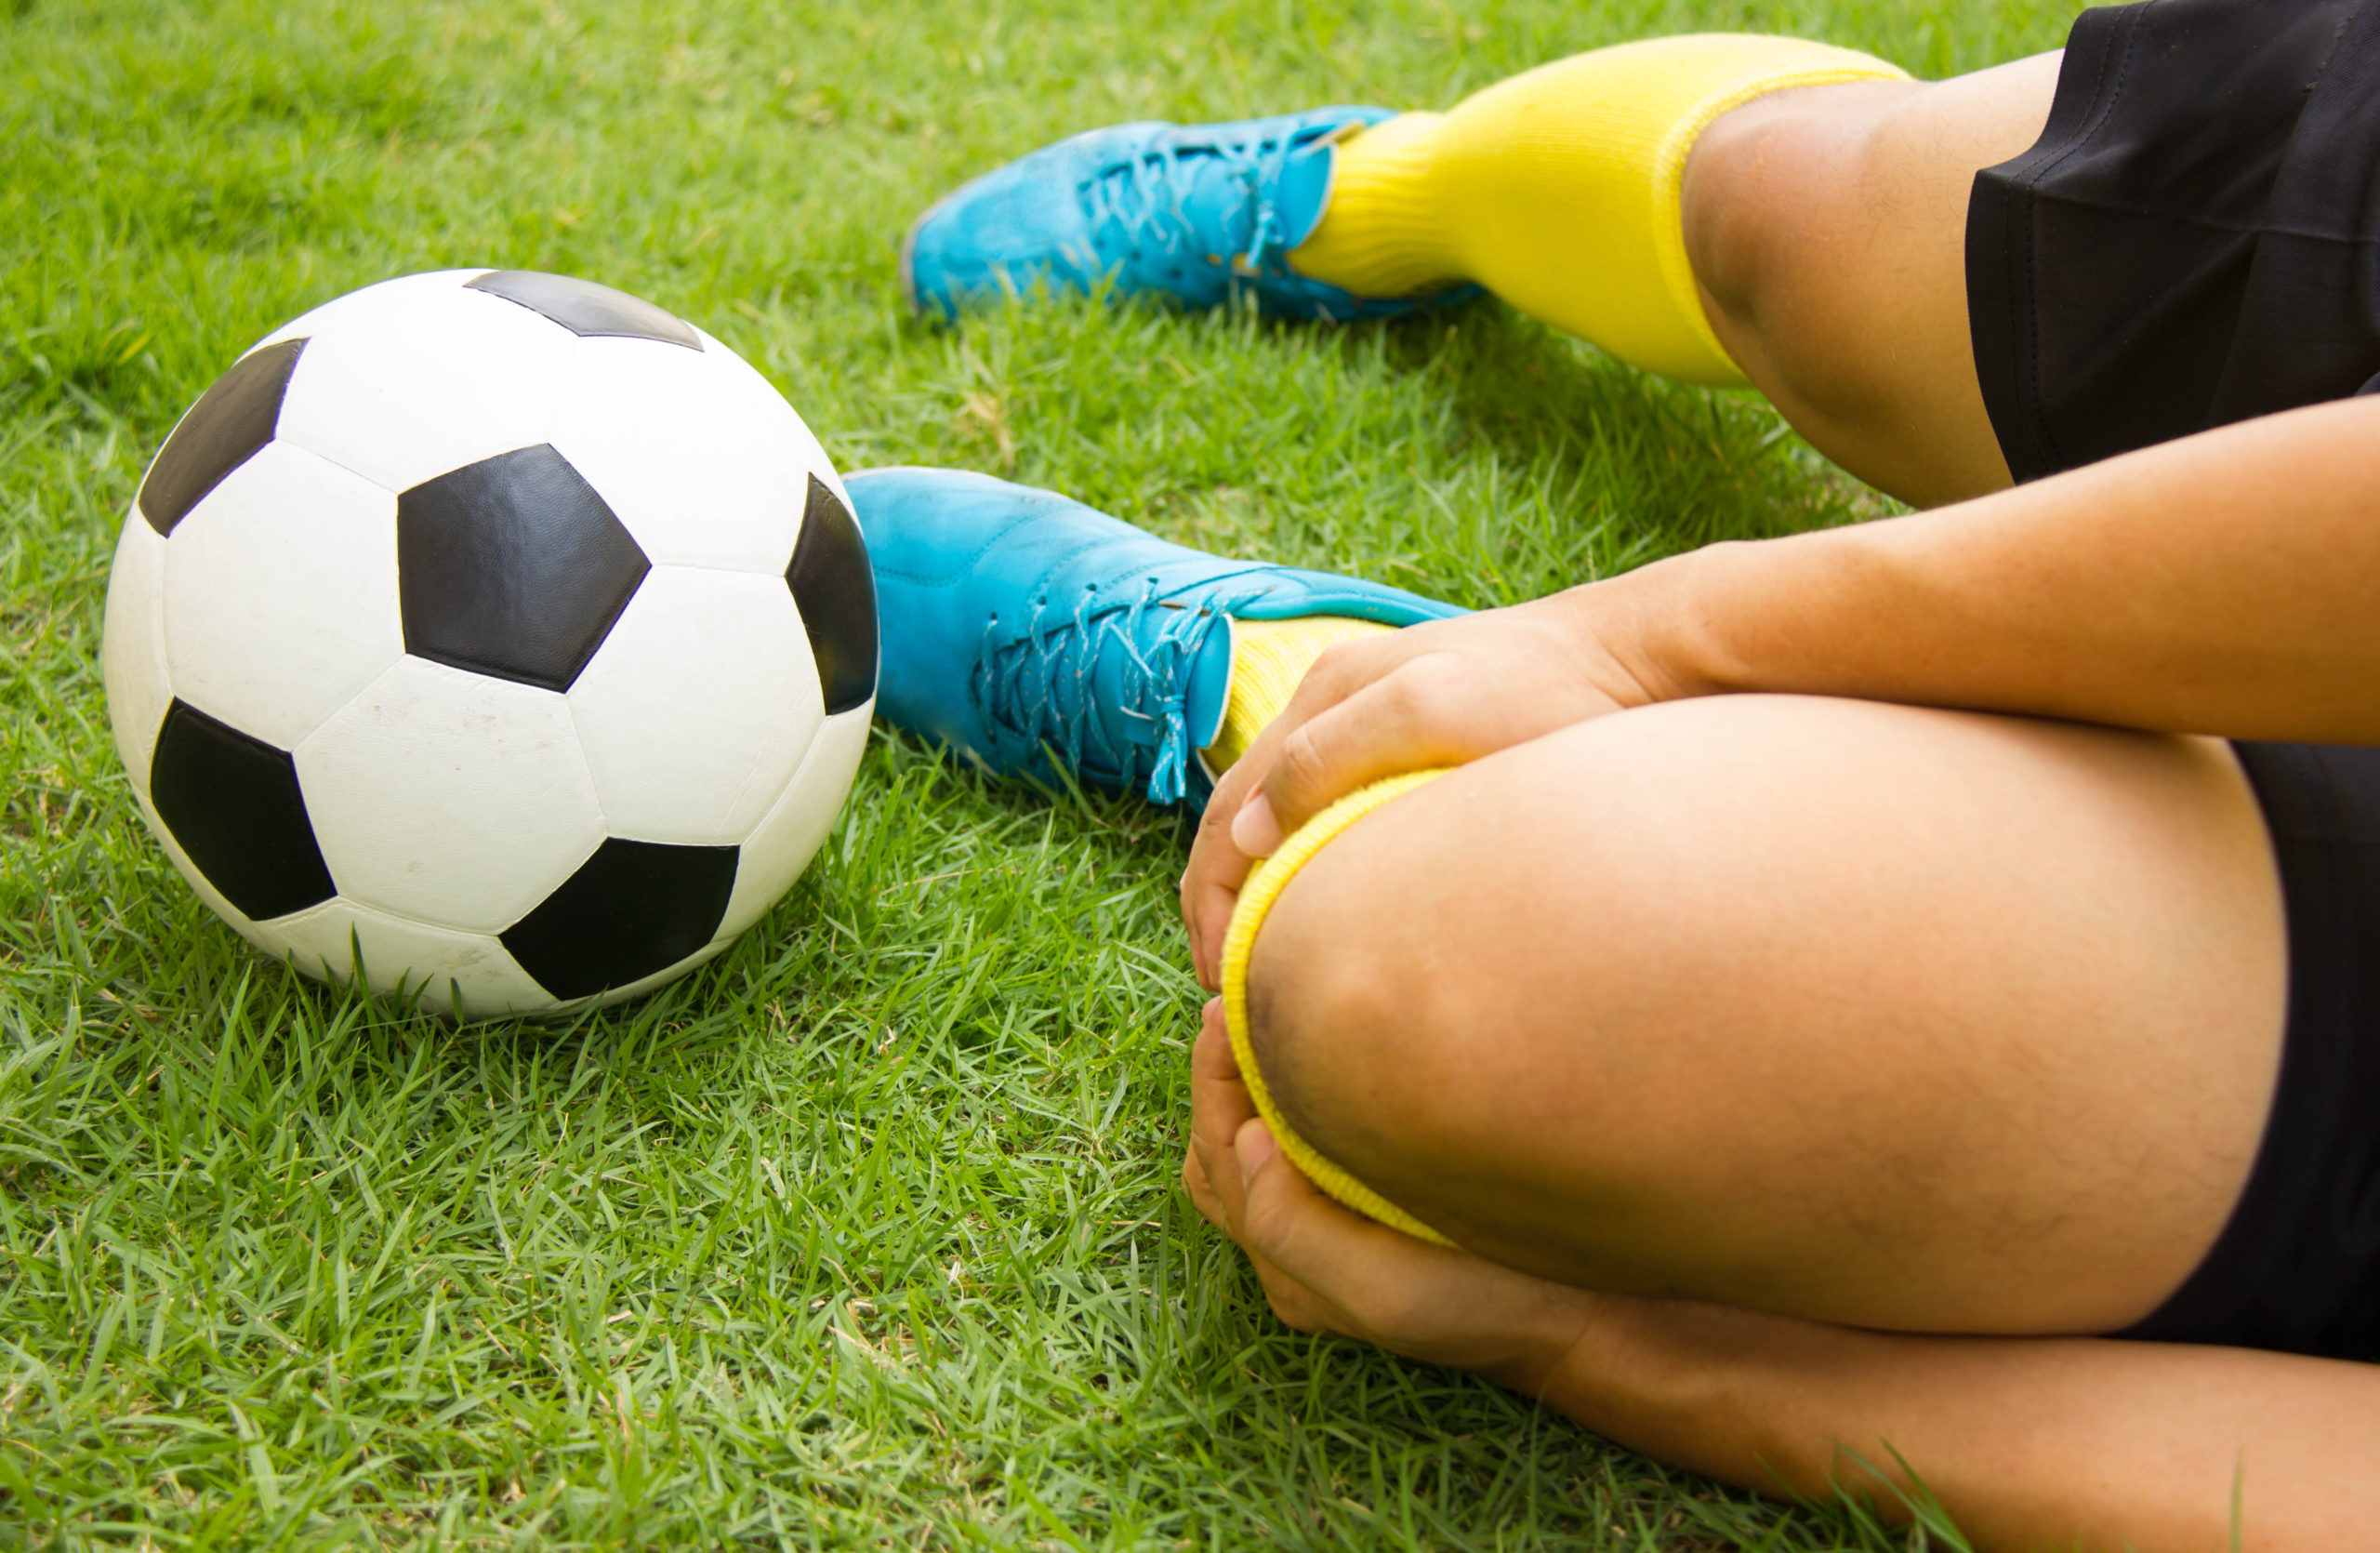 Injured player on the ground with a soccer ball next to bright teal soccer shoes. 